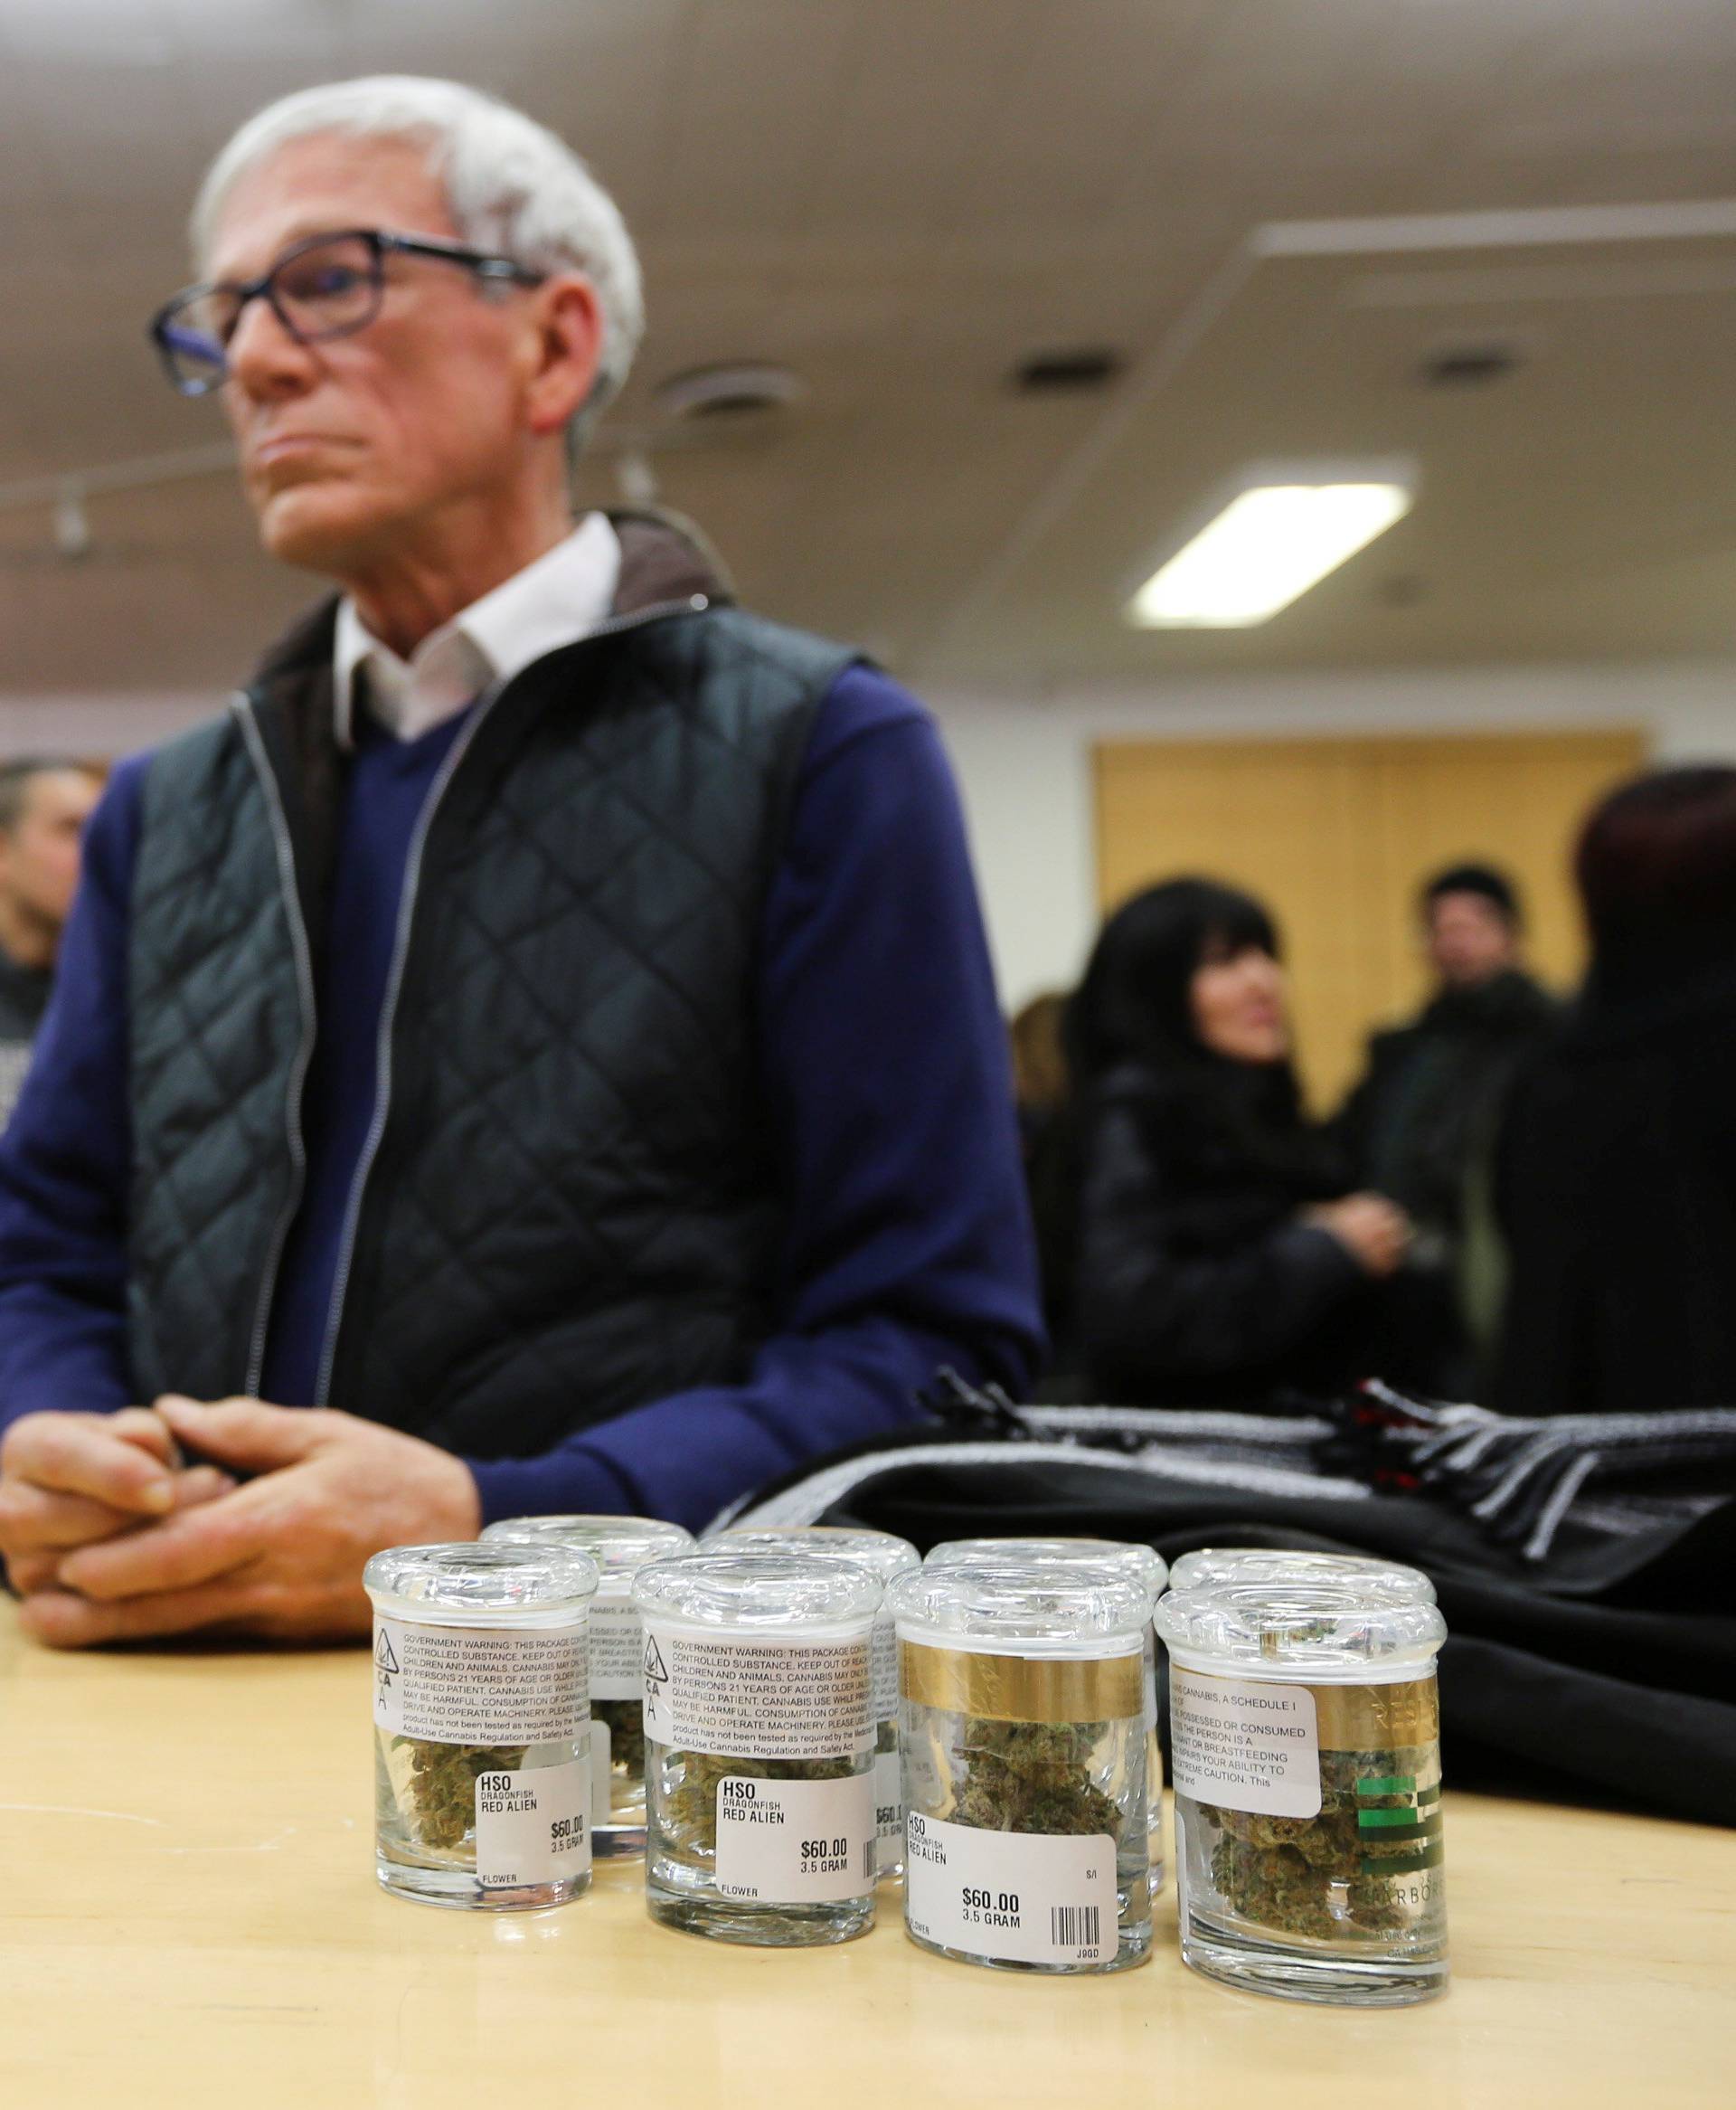 A customer waits at the counter to purchase marijuana at a dispensary in Oakland on the first day of legalized recreational marijuana sales in California